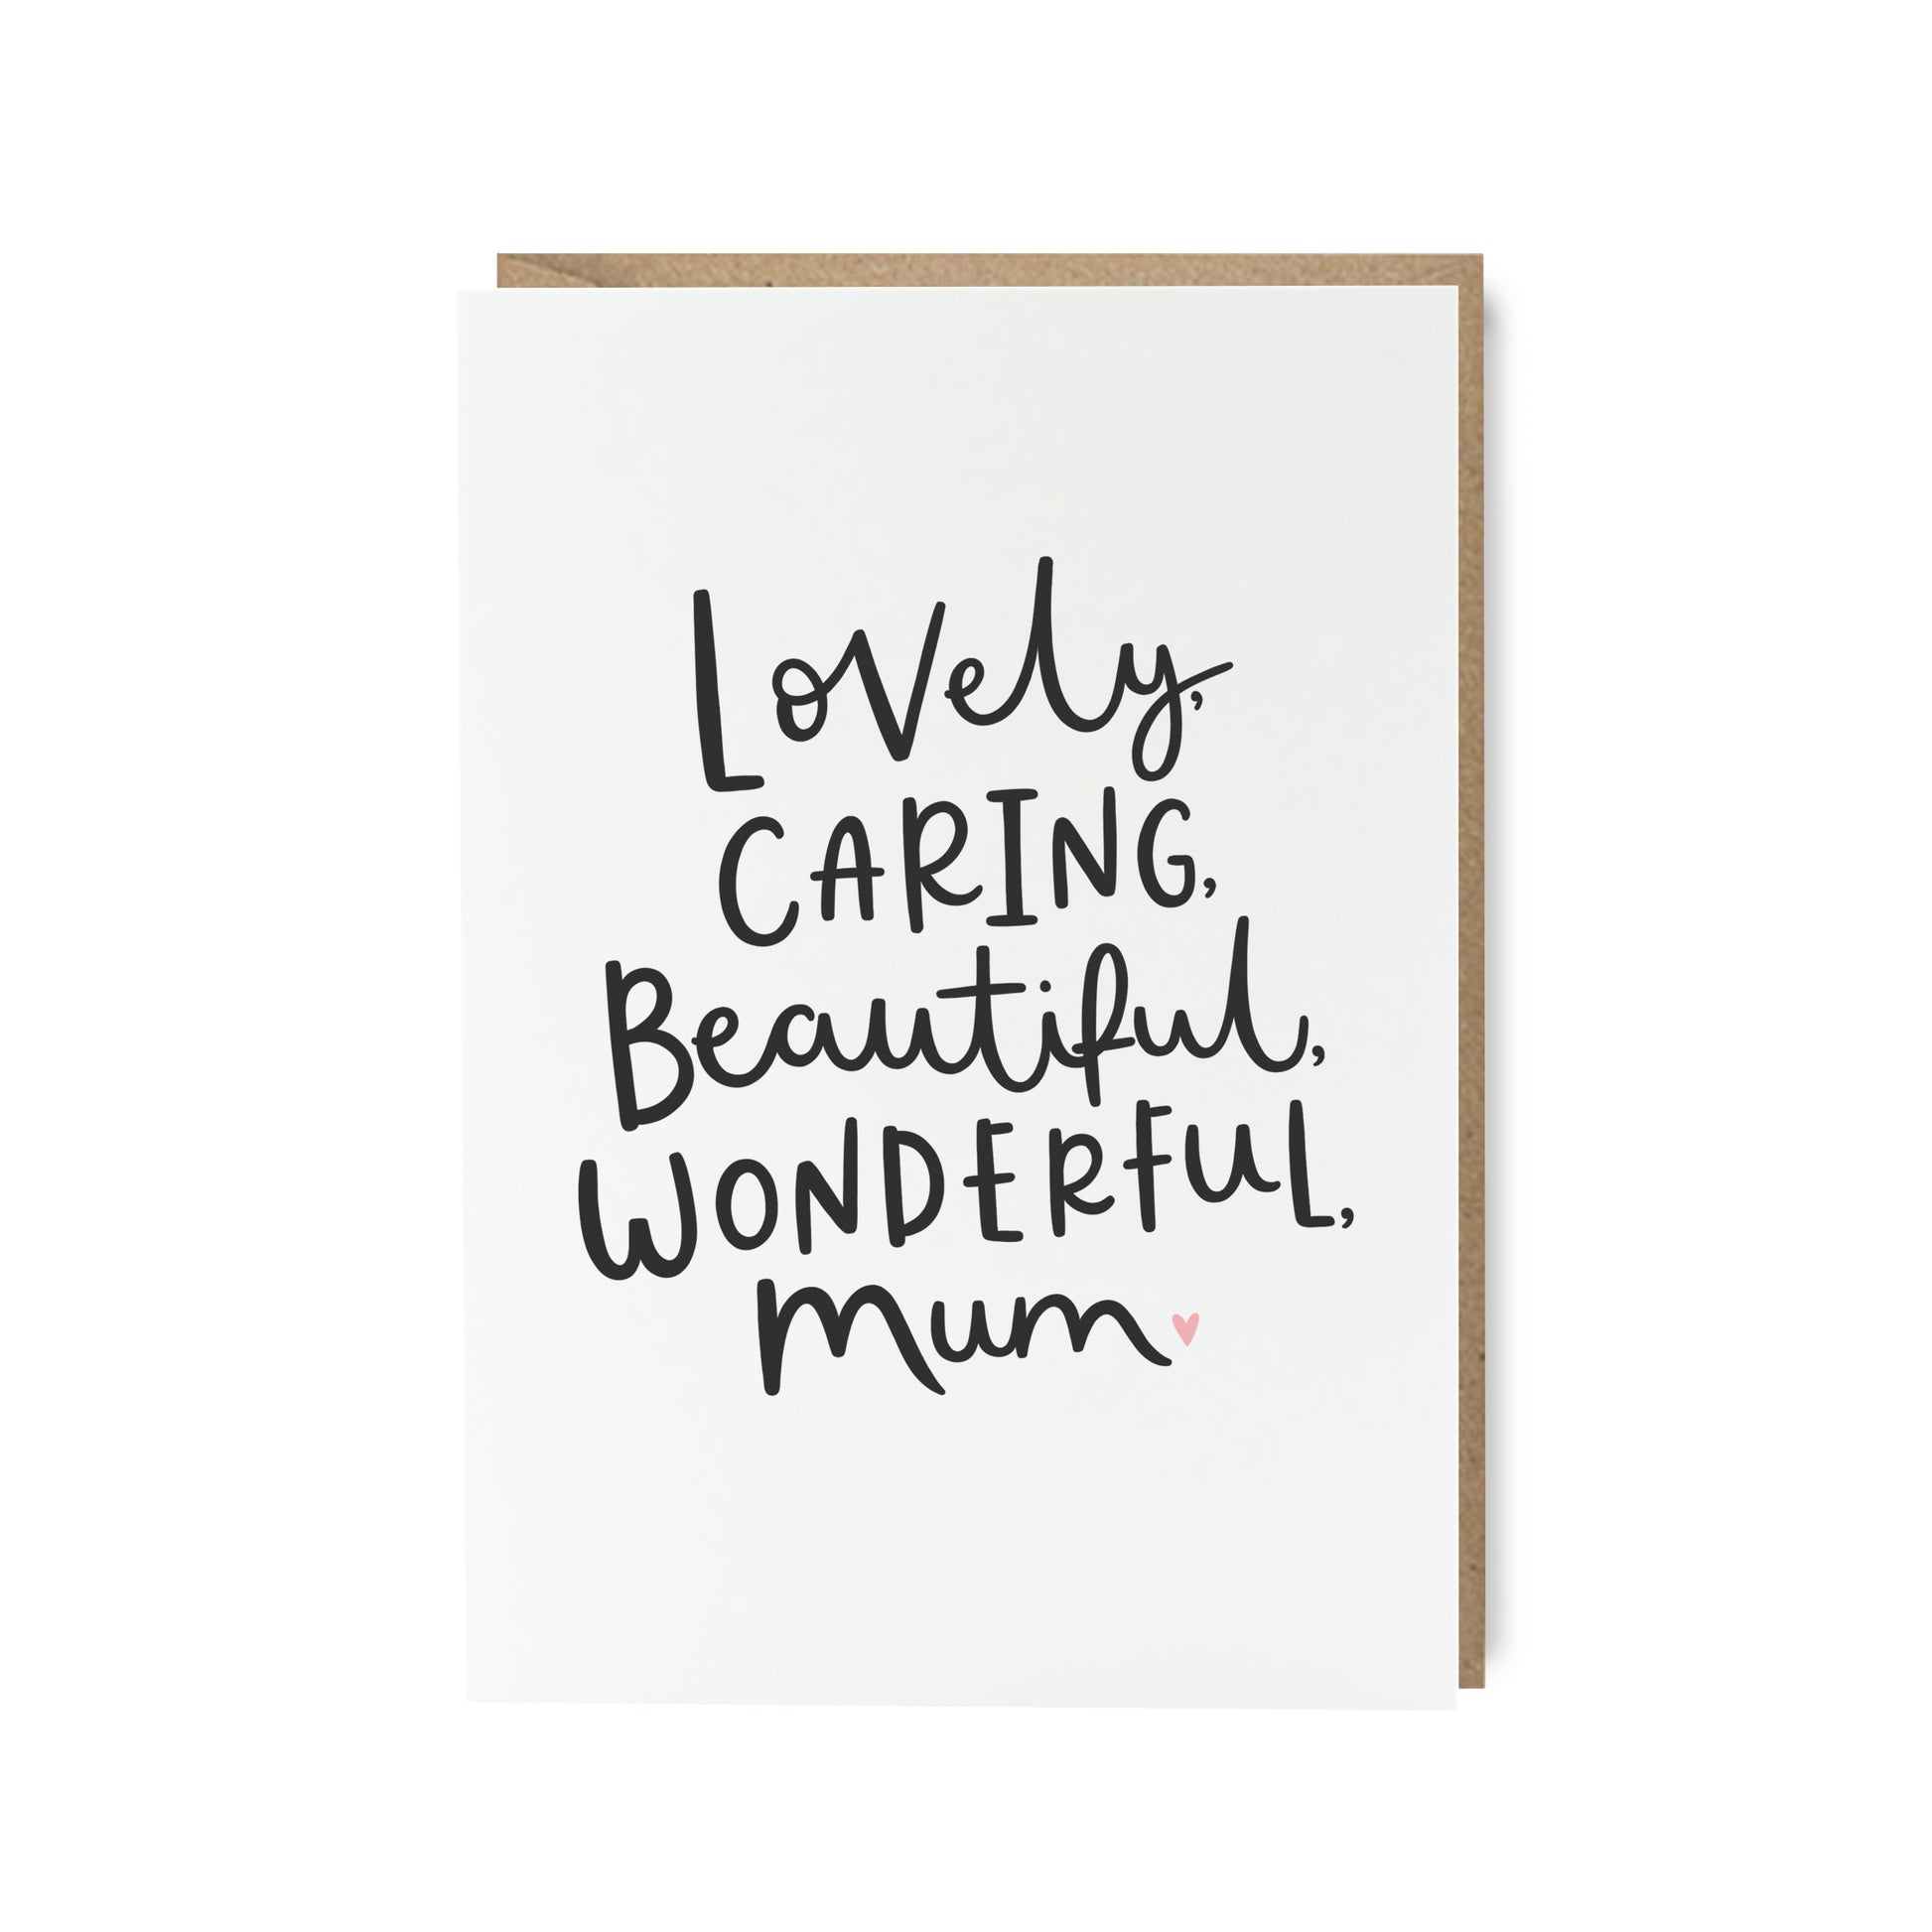 Lovely, caring, beautiful, wonderful mum mother's day card by Abbie Imagine